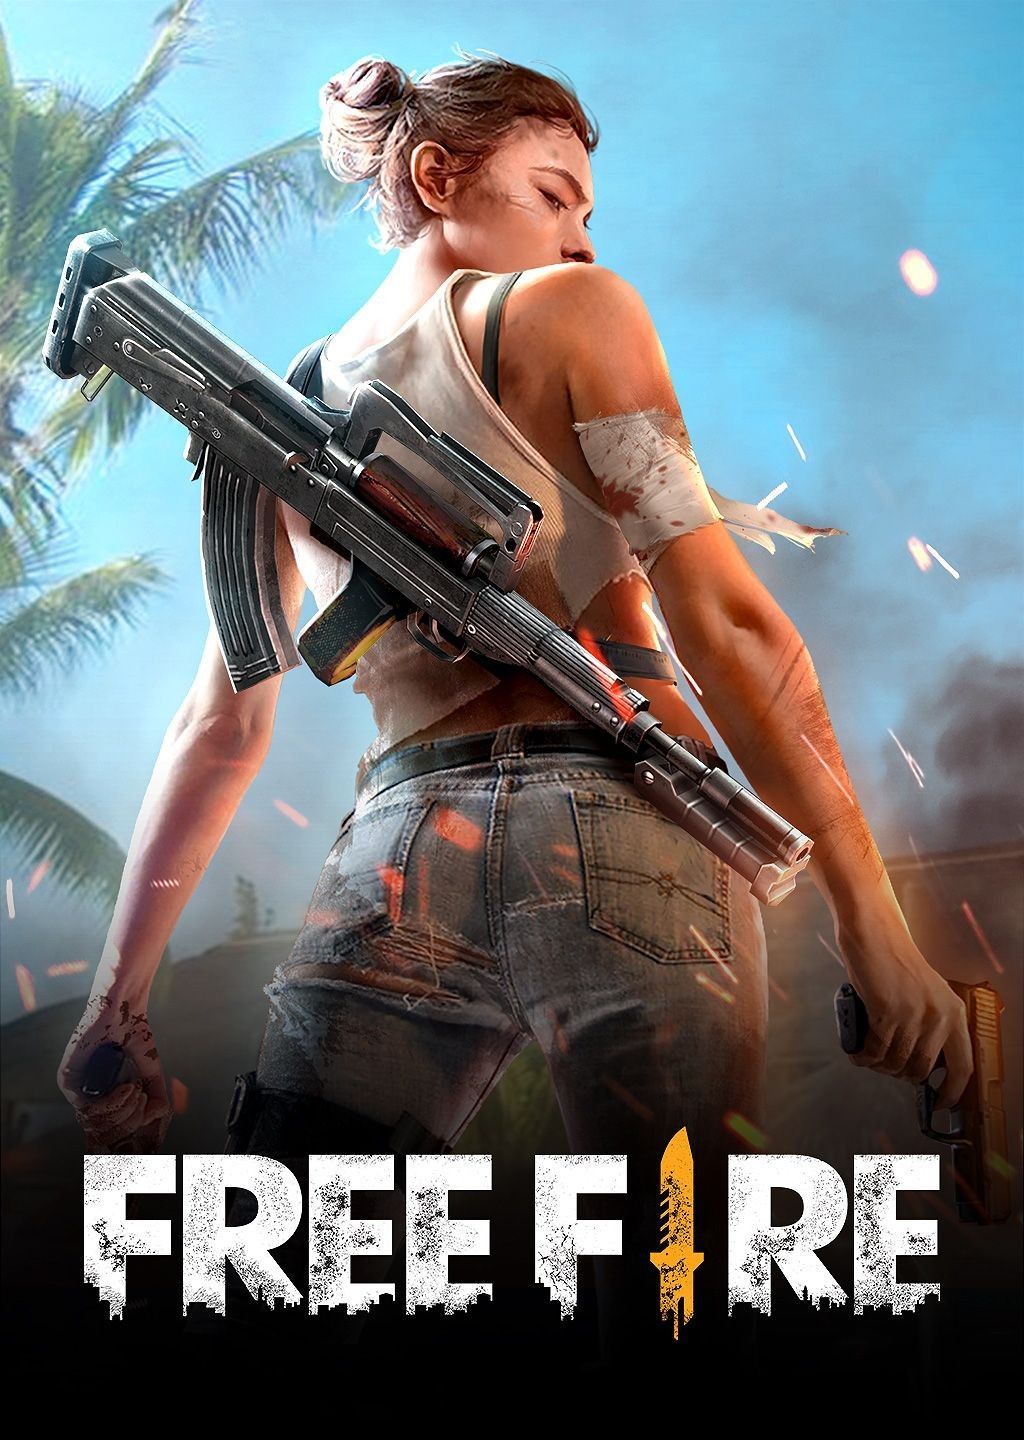 Collection of Newest Free Fire Wallpaper, More Excited to Get BOOYAH!